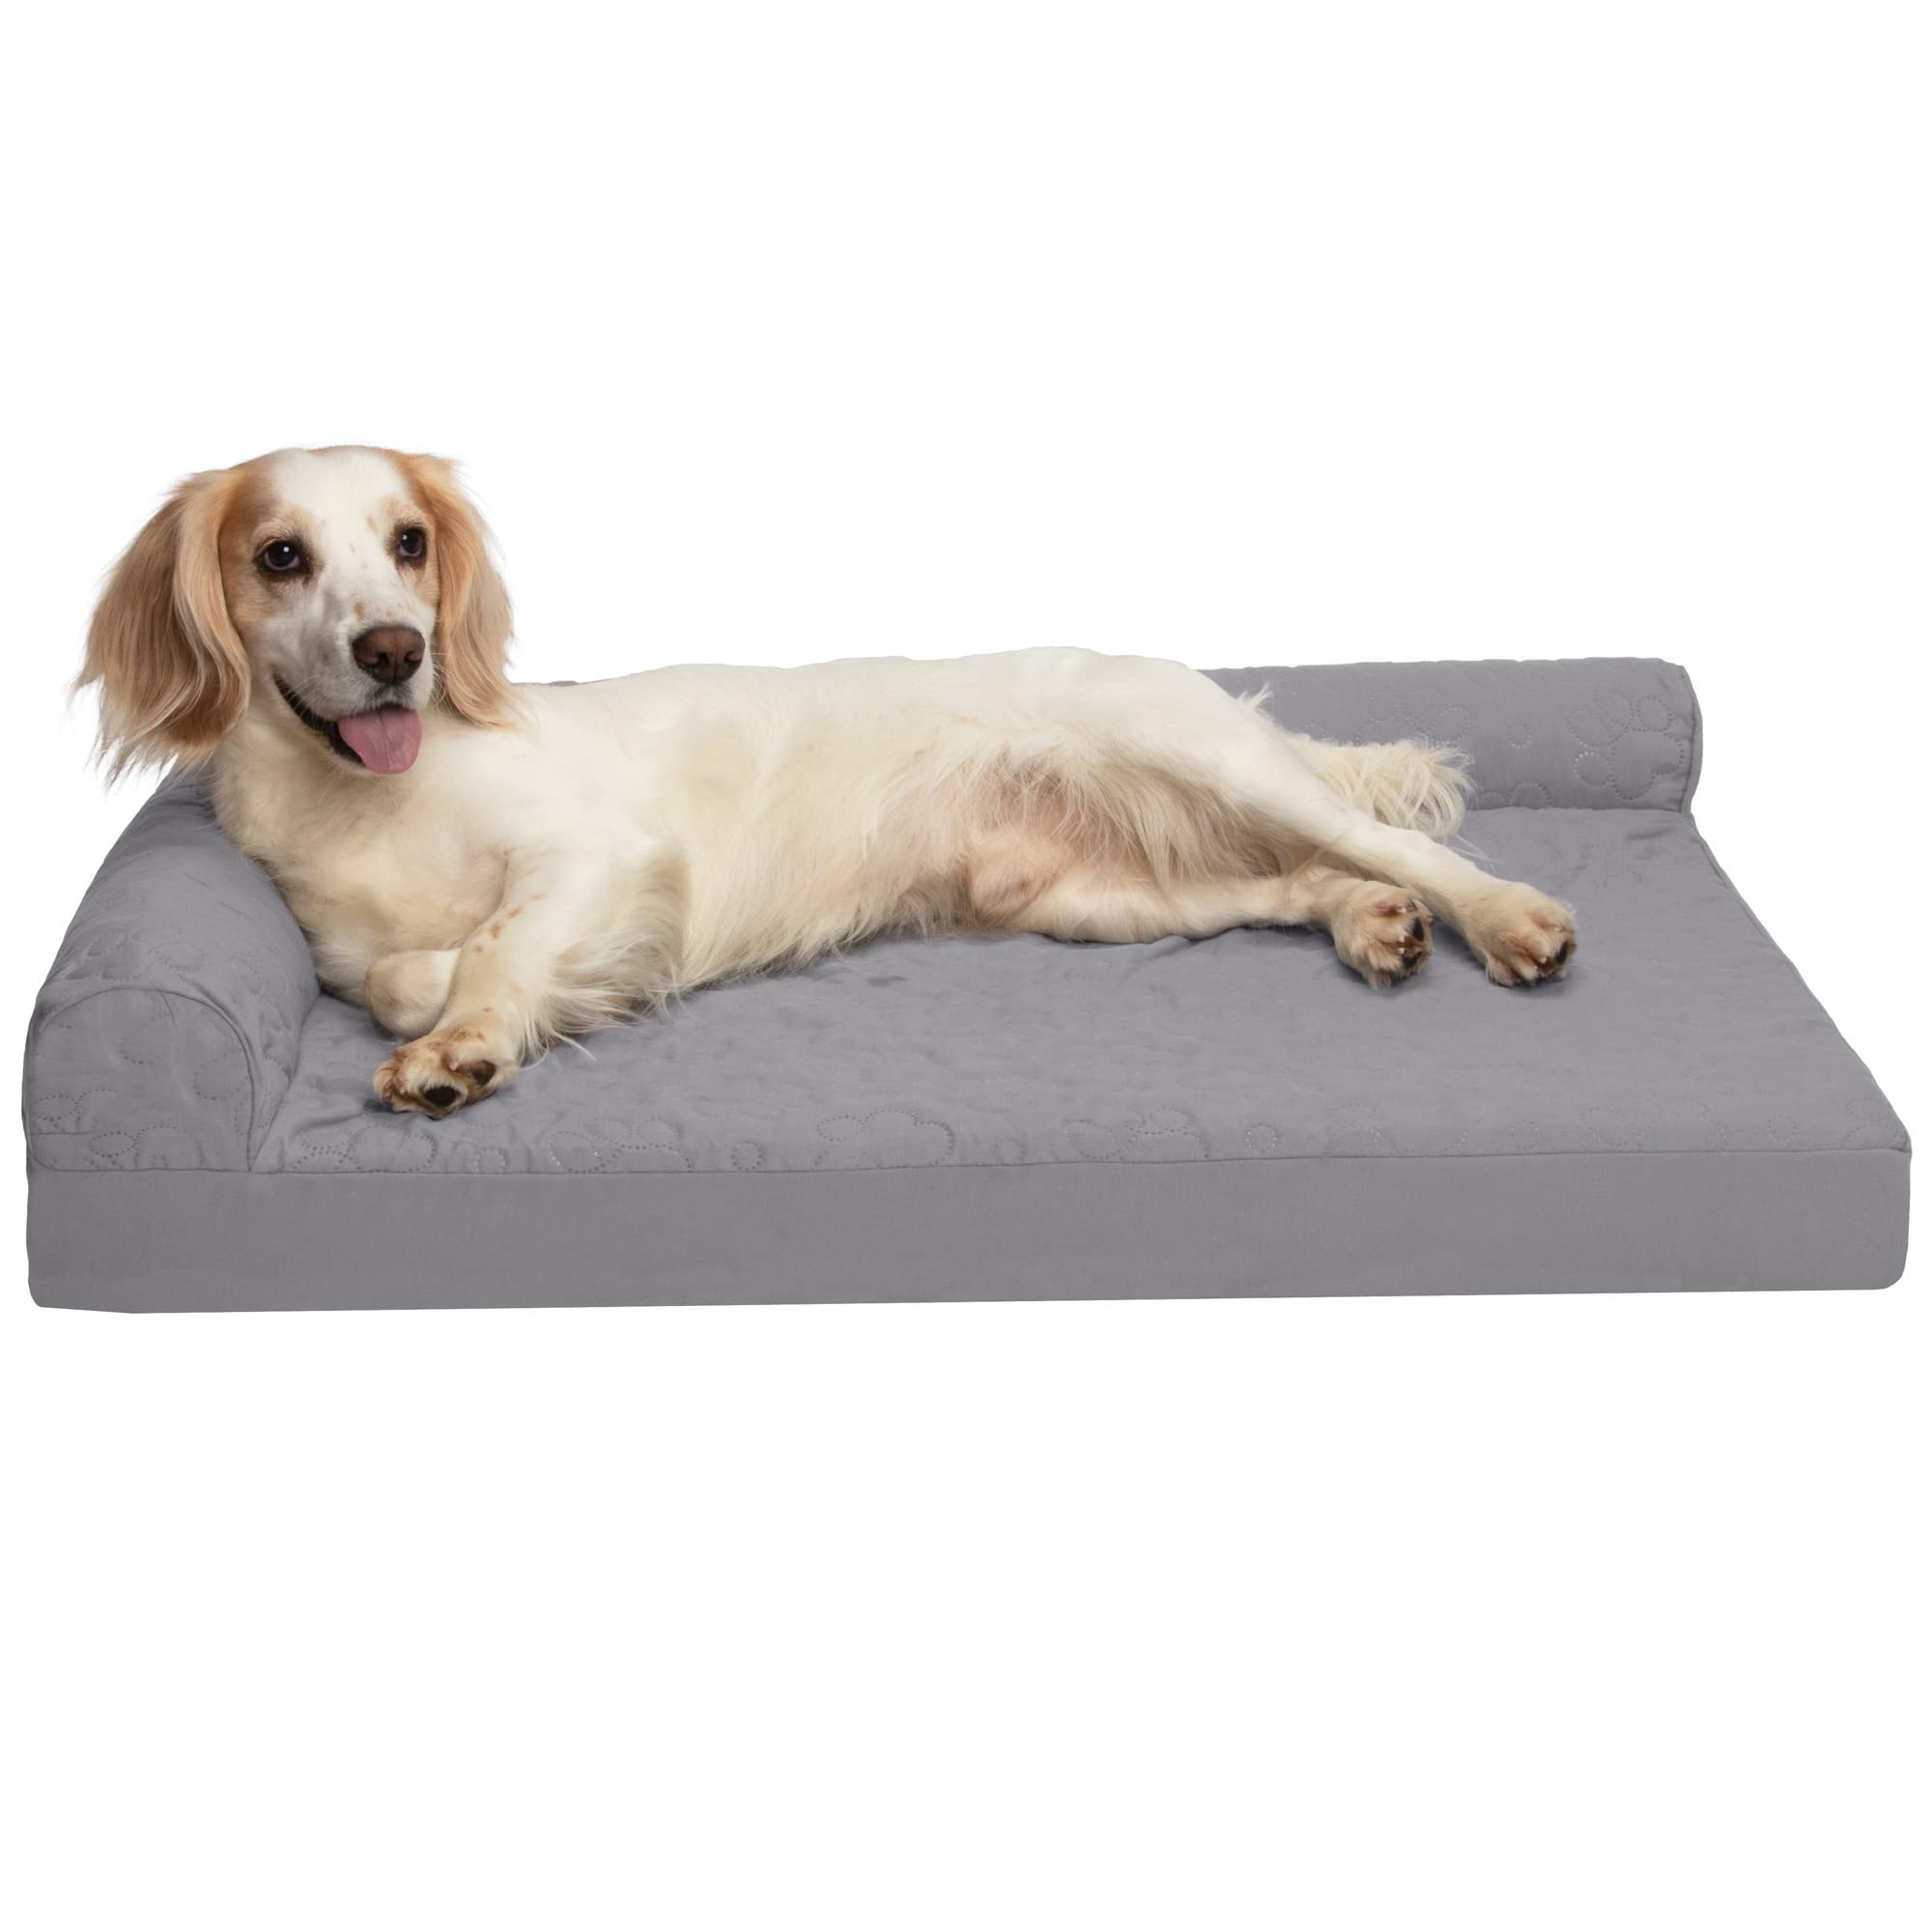 Furhaven Large Memory Foam Dog Bed Pinsonic Quilted Paw...